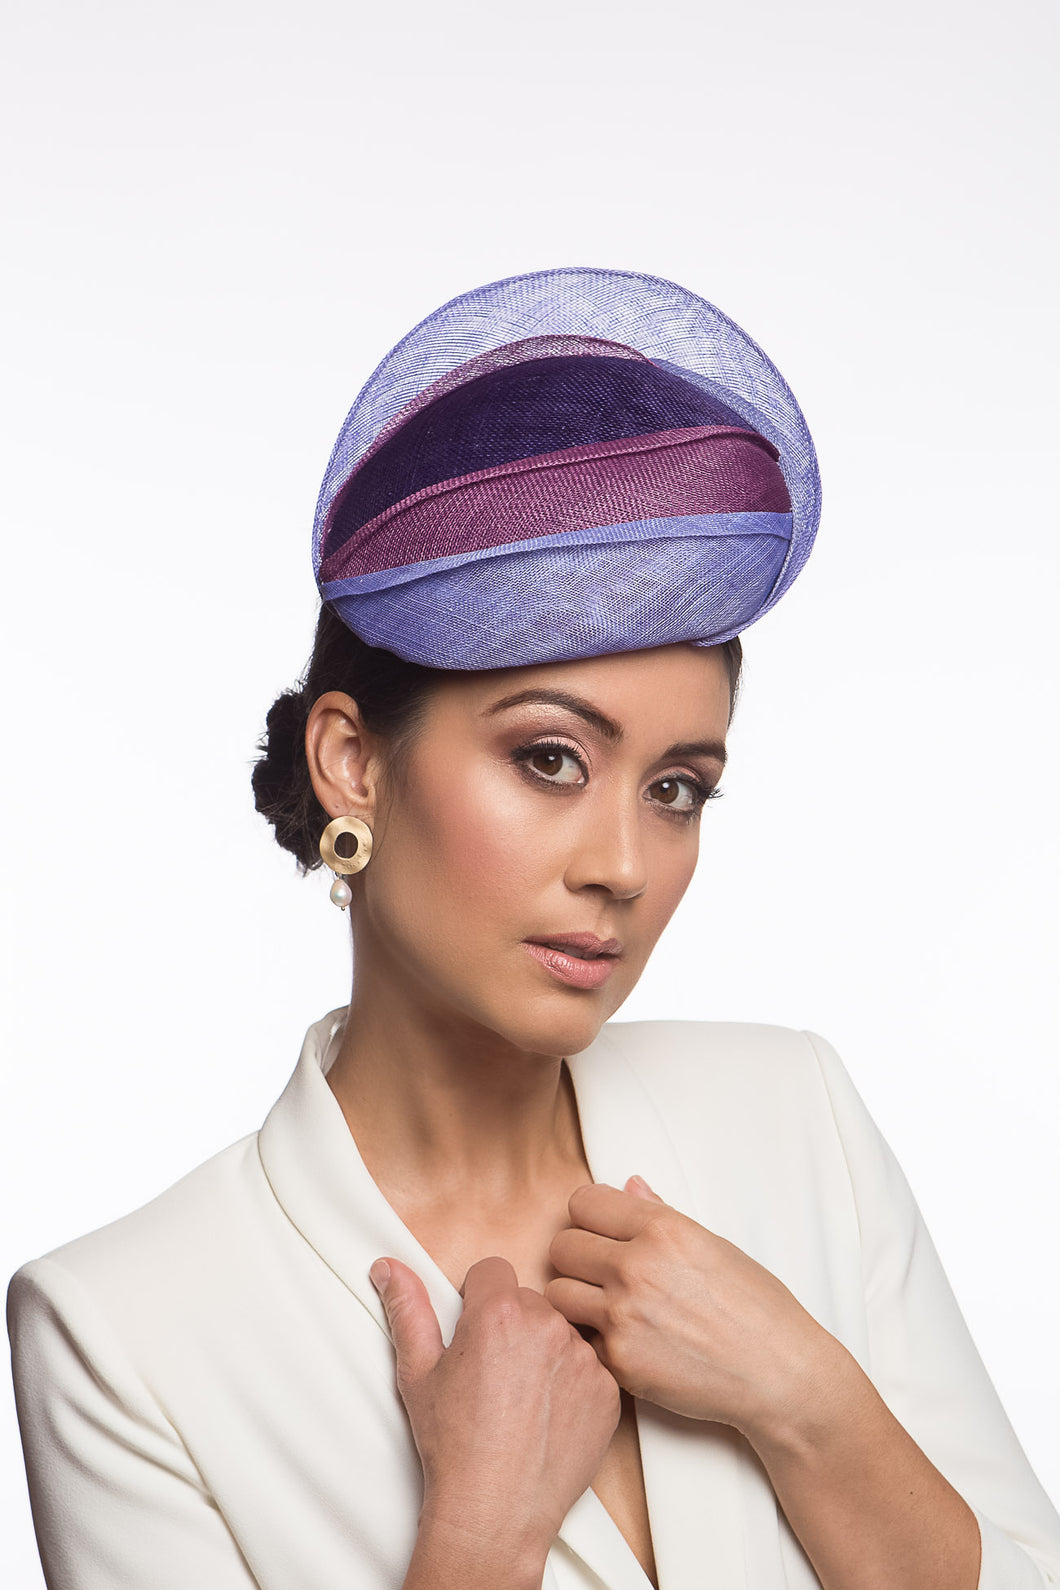 The Shades of Purple Beret style is a beautiful, tiered beret. Different shades of purple and mauve are layered across the beret, adding texture and height